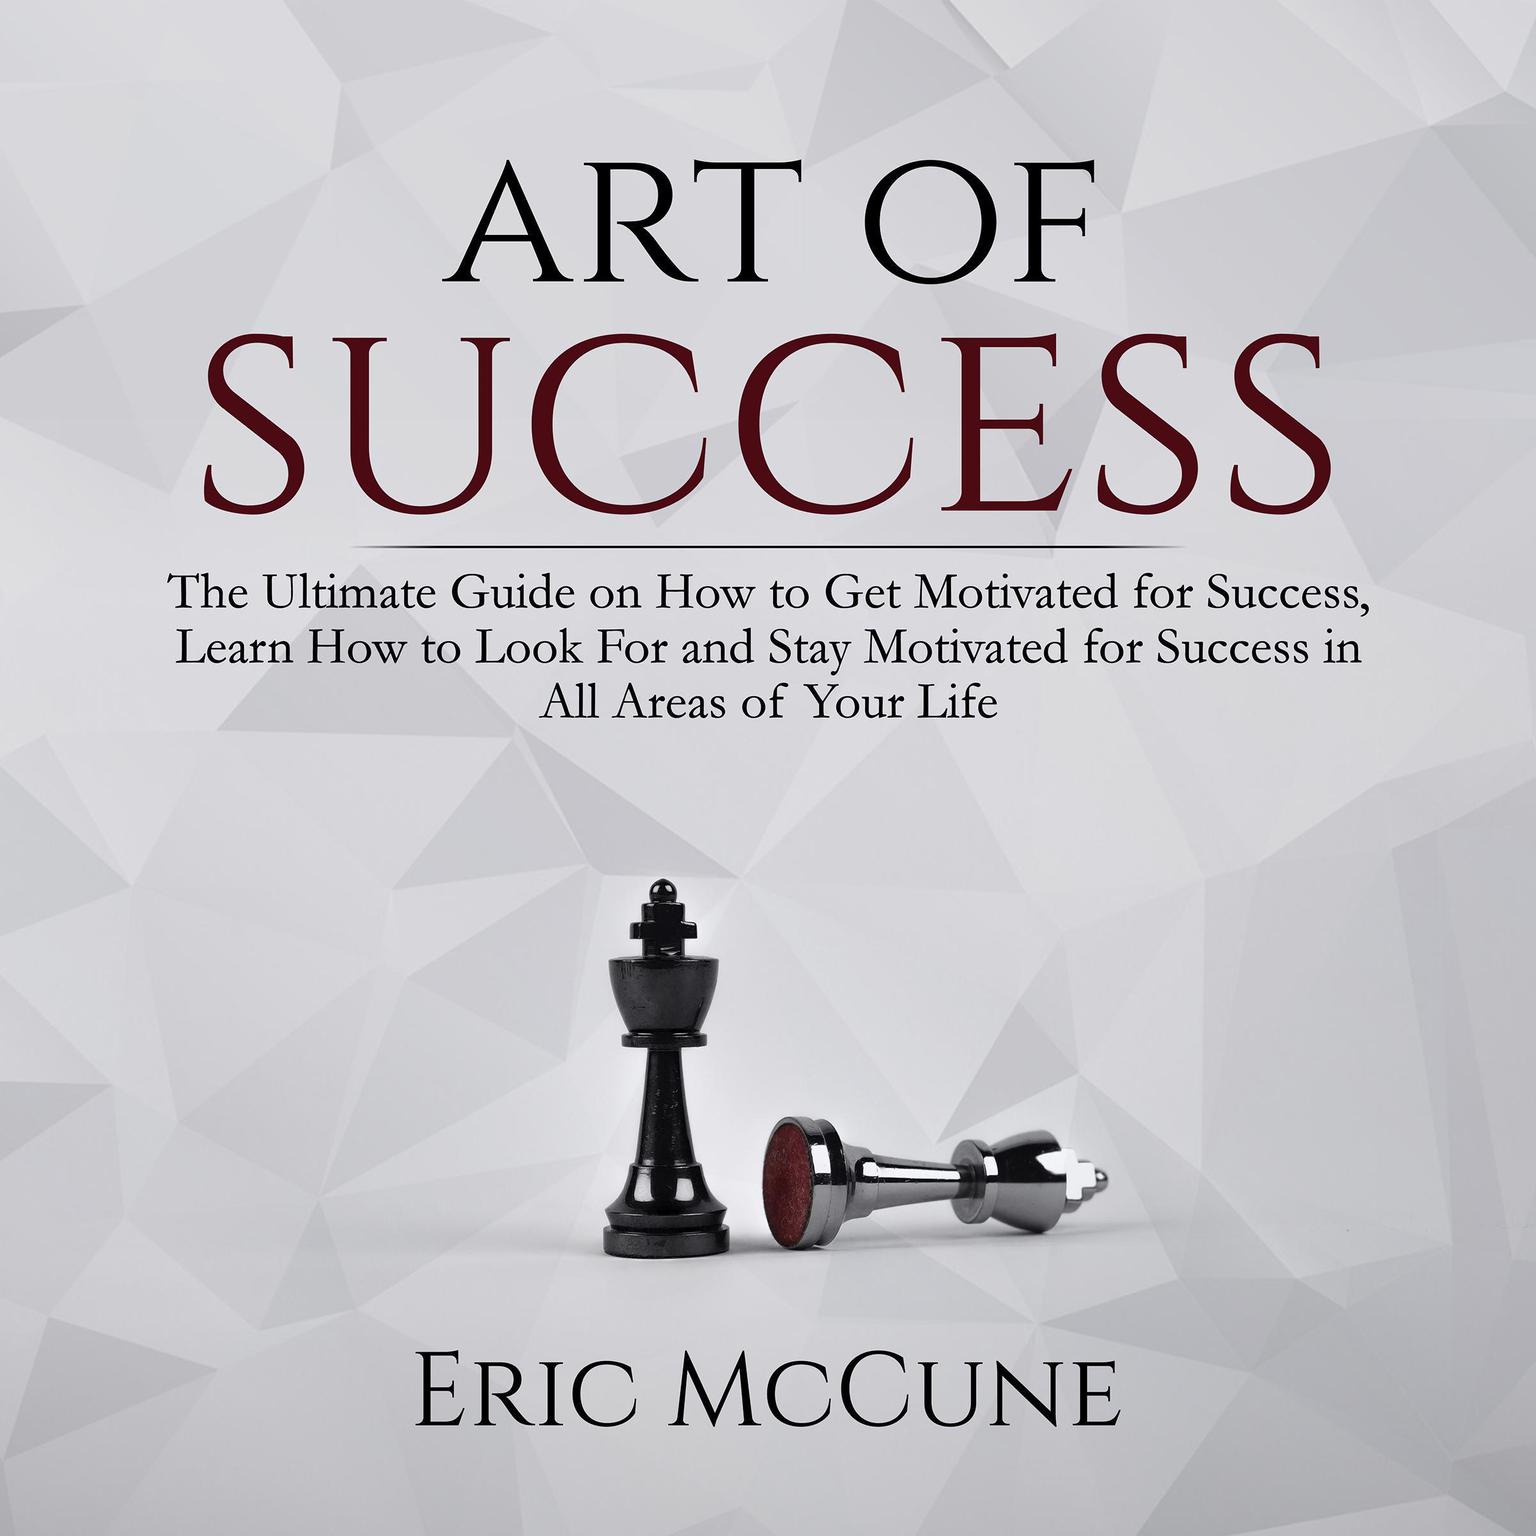 Art of Success: The Ultimate Guide on How to Get Motivated for Success, Learn How to Look For and Stay Motivated for Success in All Areas of Your Life Audiobook, by Eric McCune